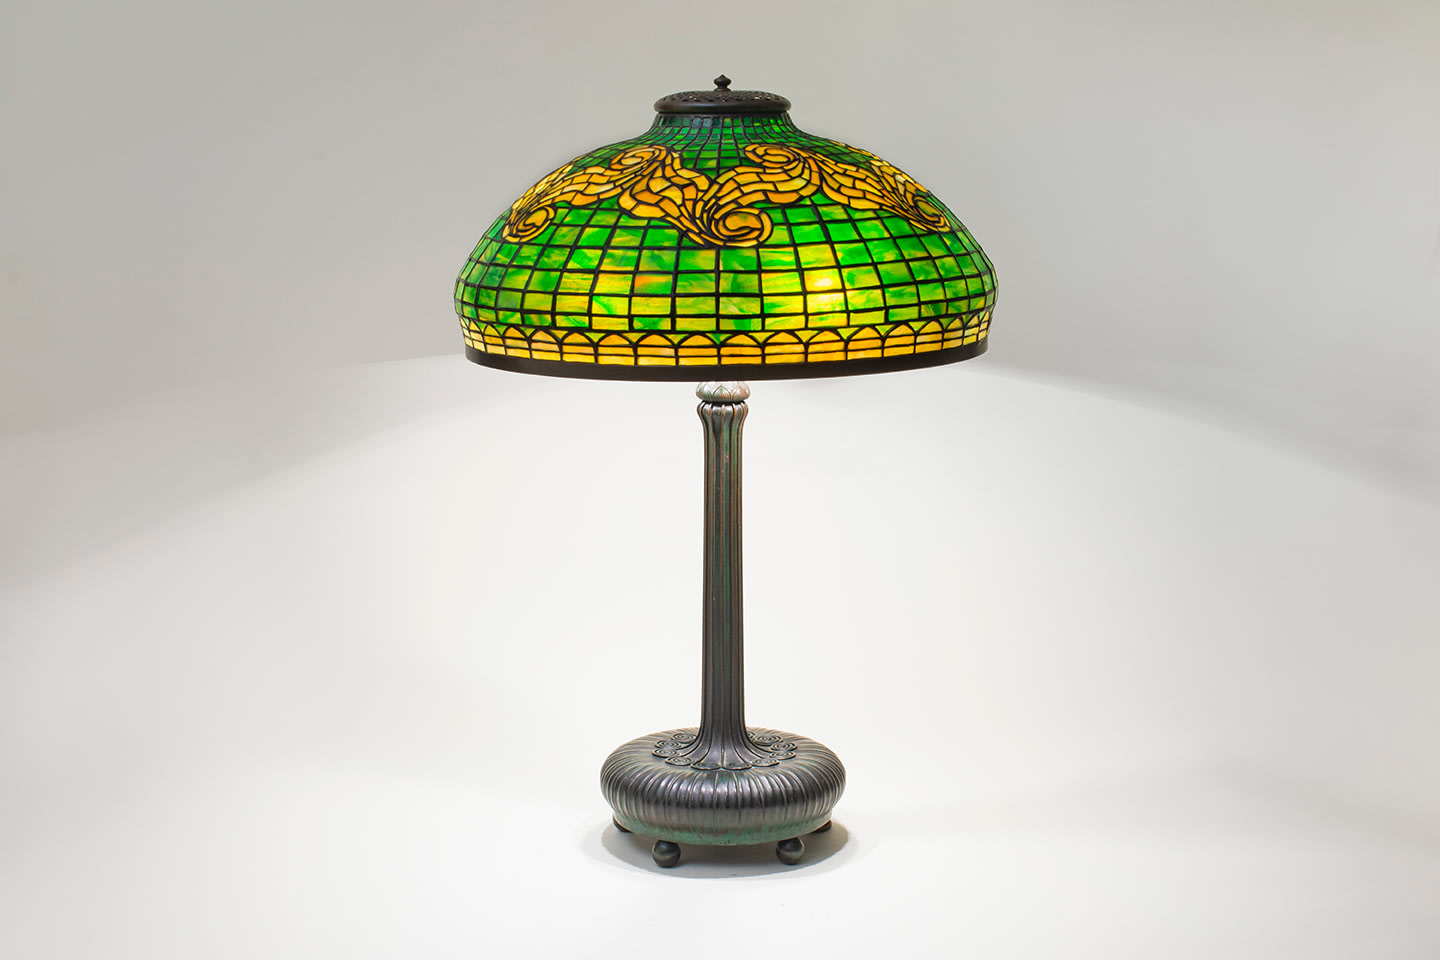 an original tiffany lamp with leaded glass shade with geometric background of gridded green glass with decoration of swag motif in contrasting yellow glass, on bronze lamp base with a round cushion-like foot